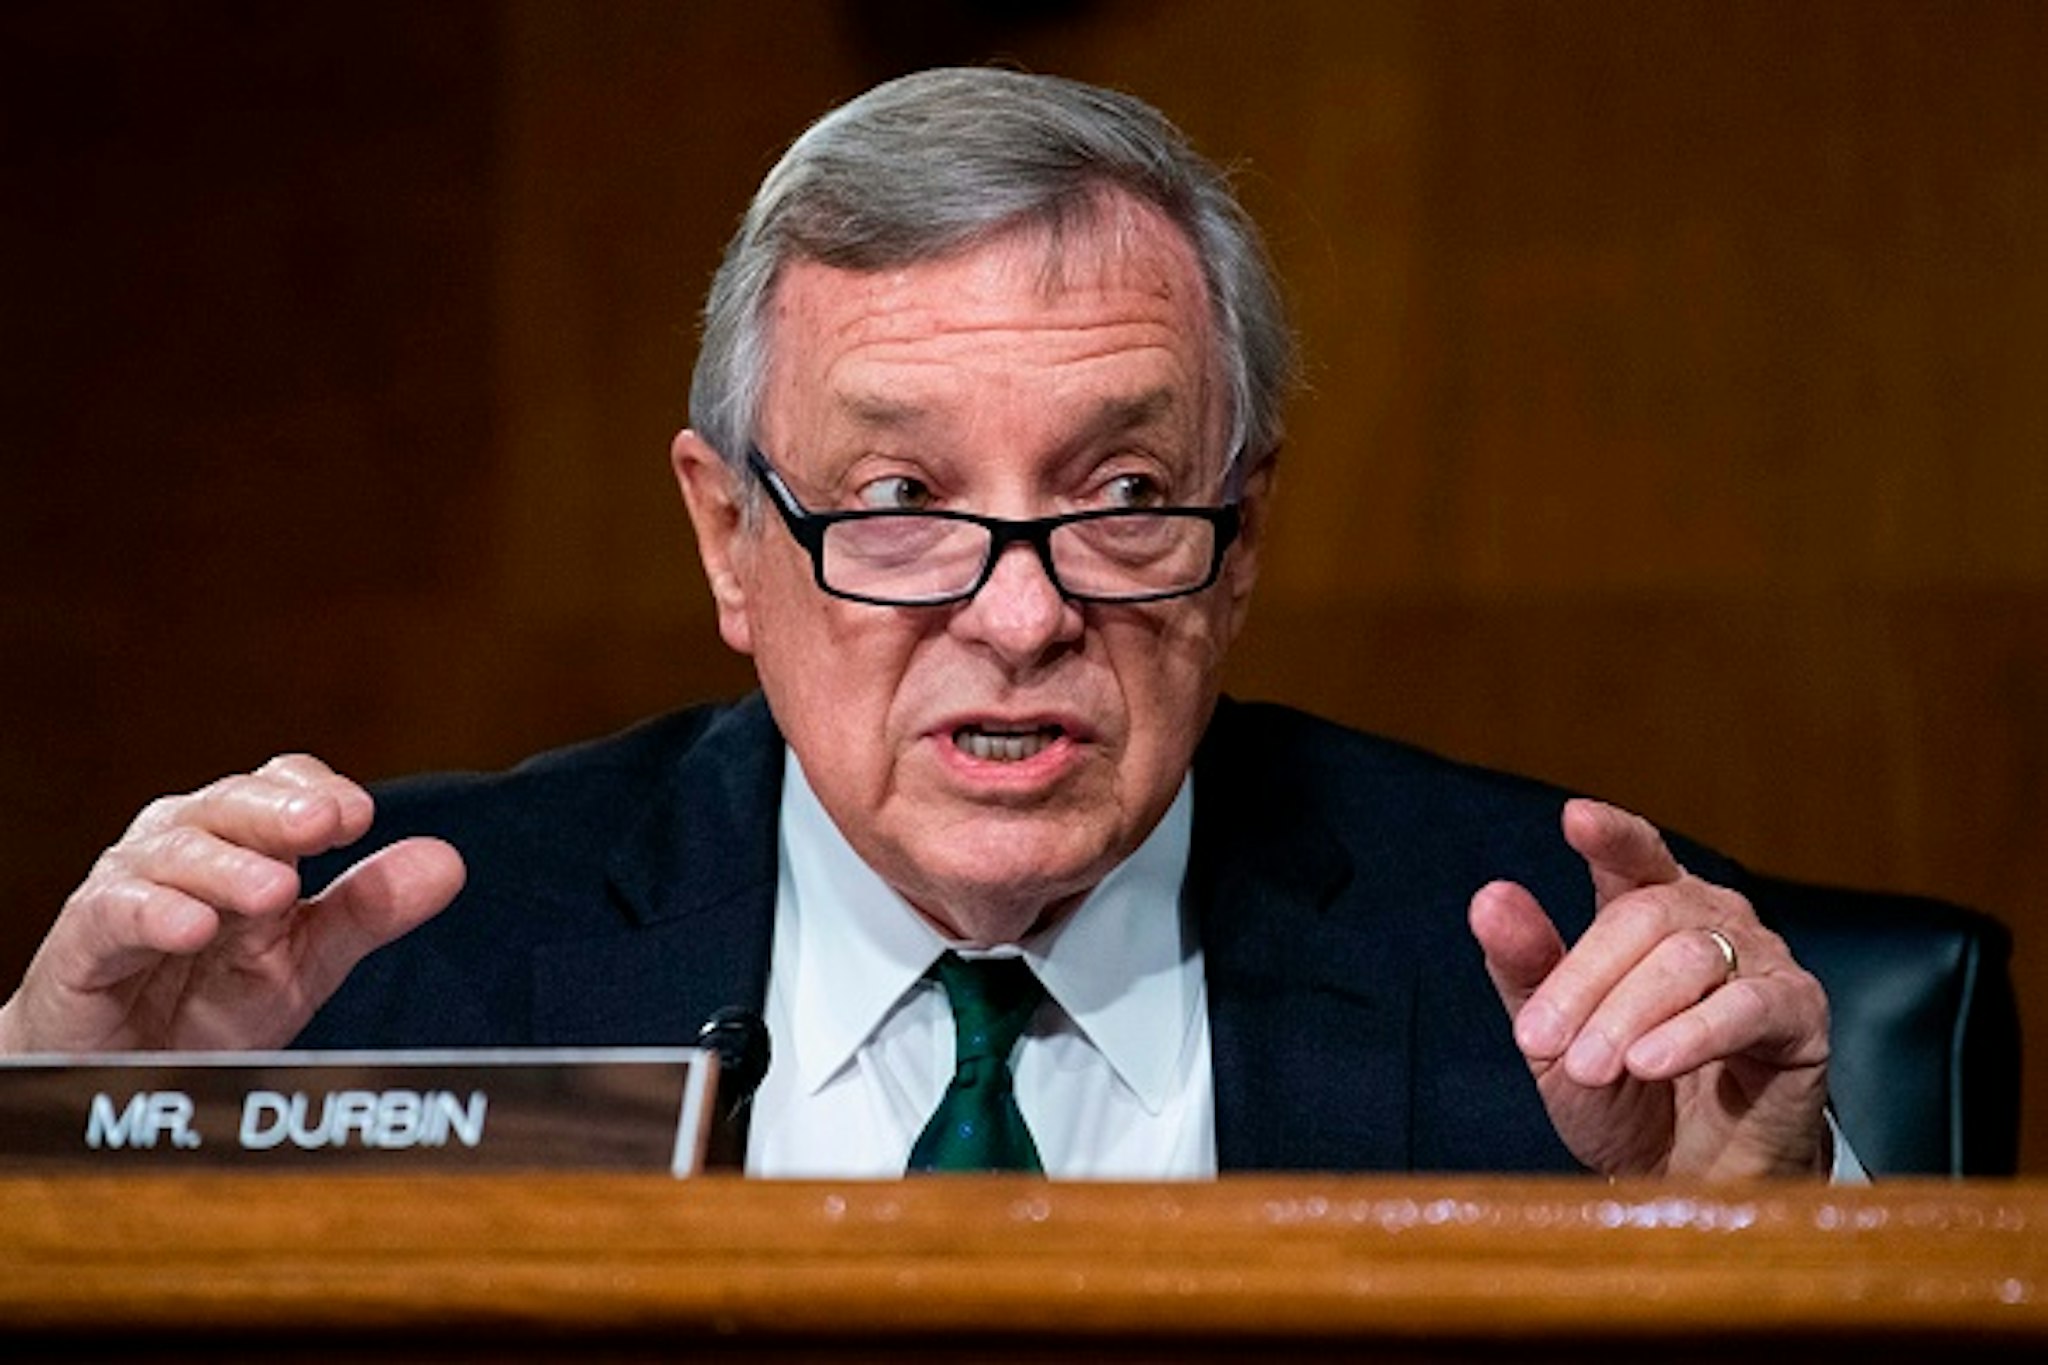 Sen. Richard Durbin, D-Ill., asks a question during the Senate Judiciary Committee hearing titled Police Use of Force and Community Relations, in Dirksen Senate Office Building in Washington, DC, on June 16, 2020.